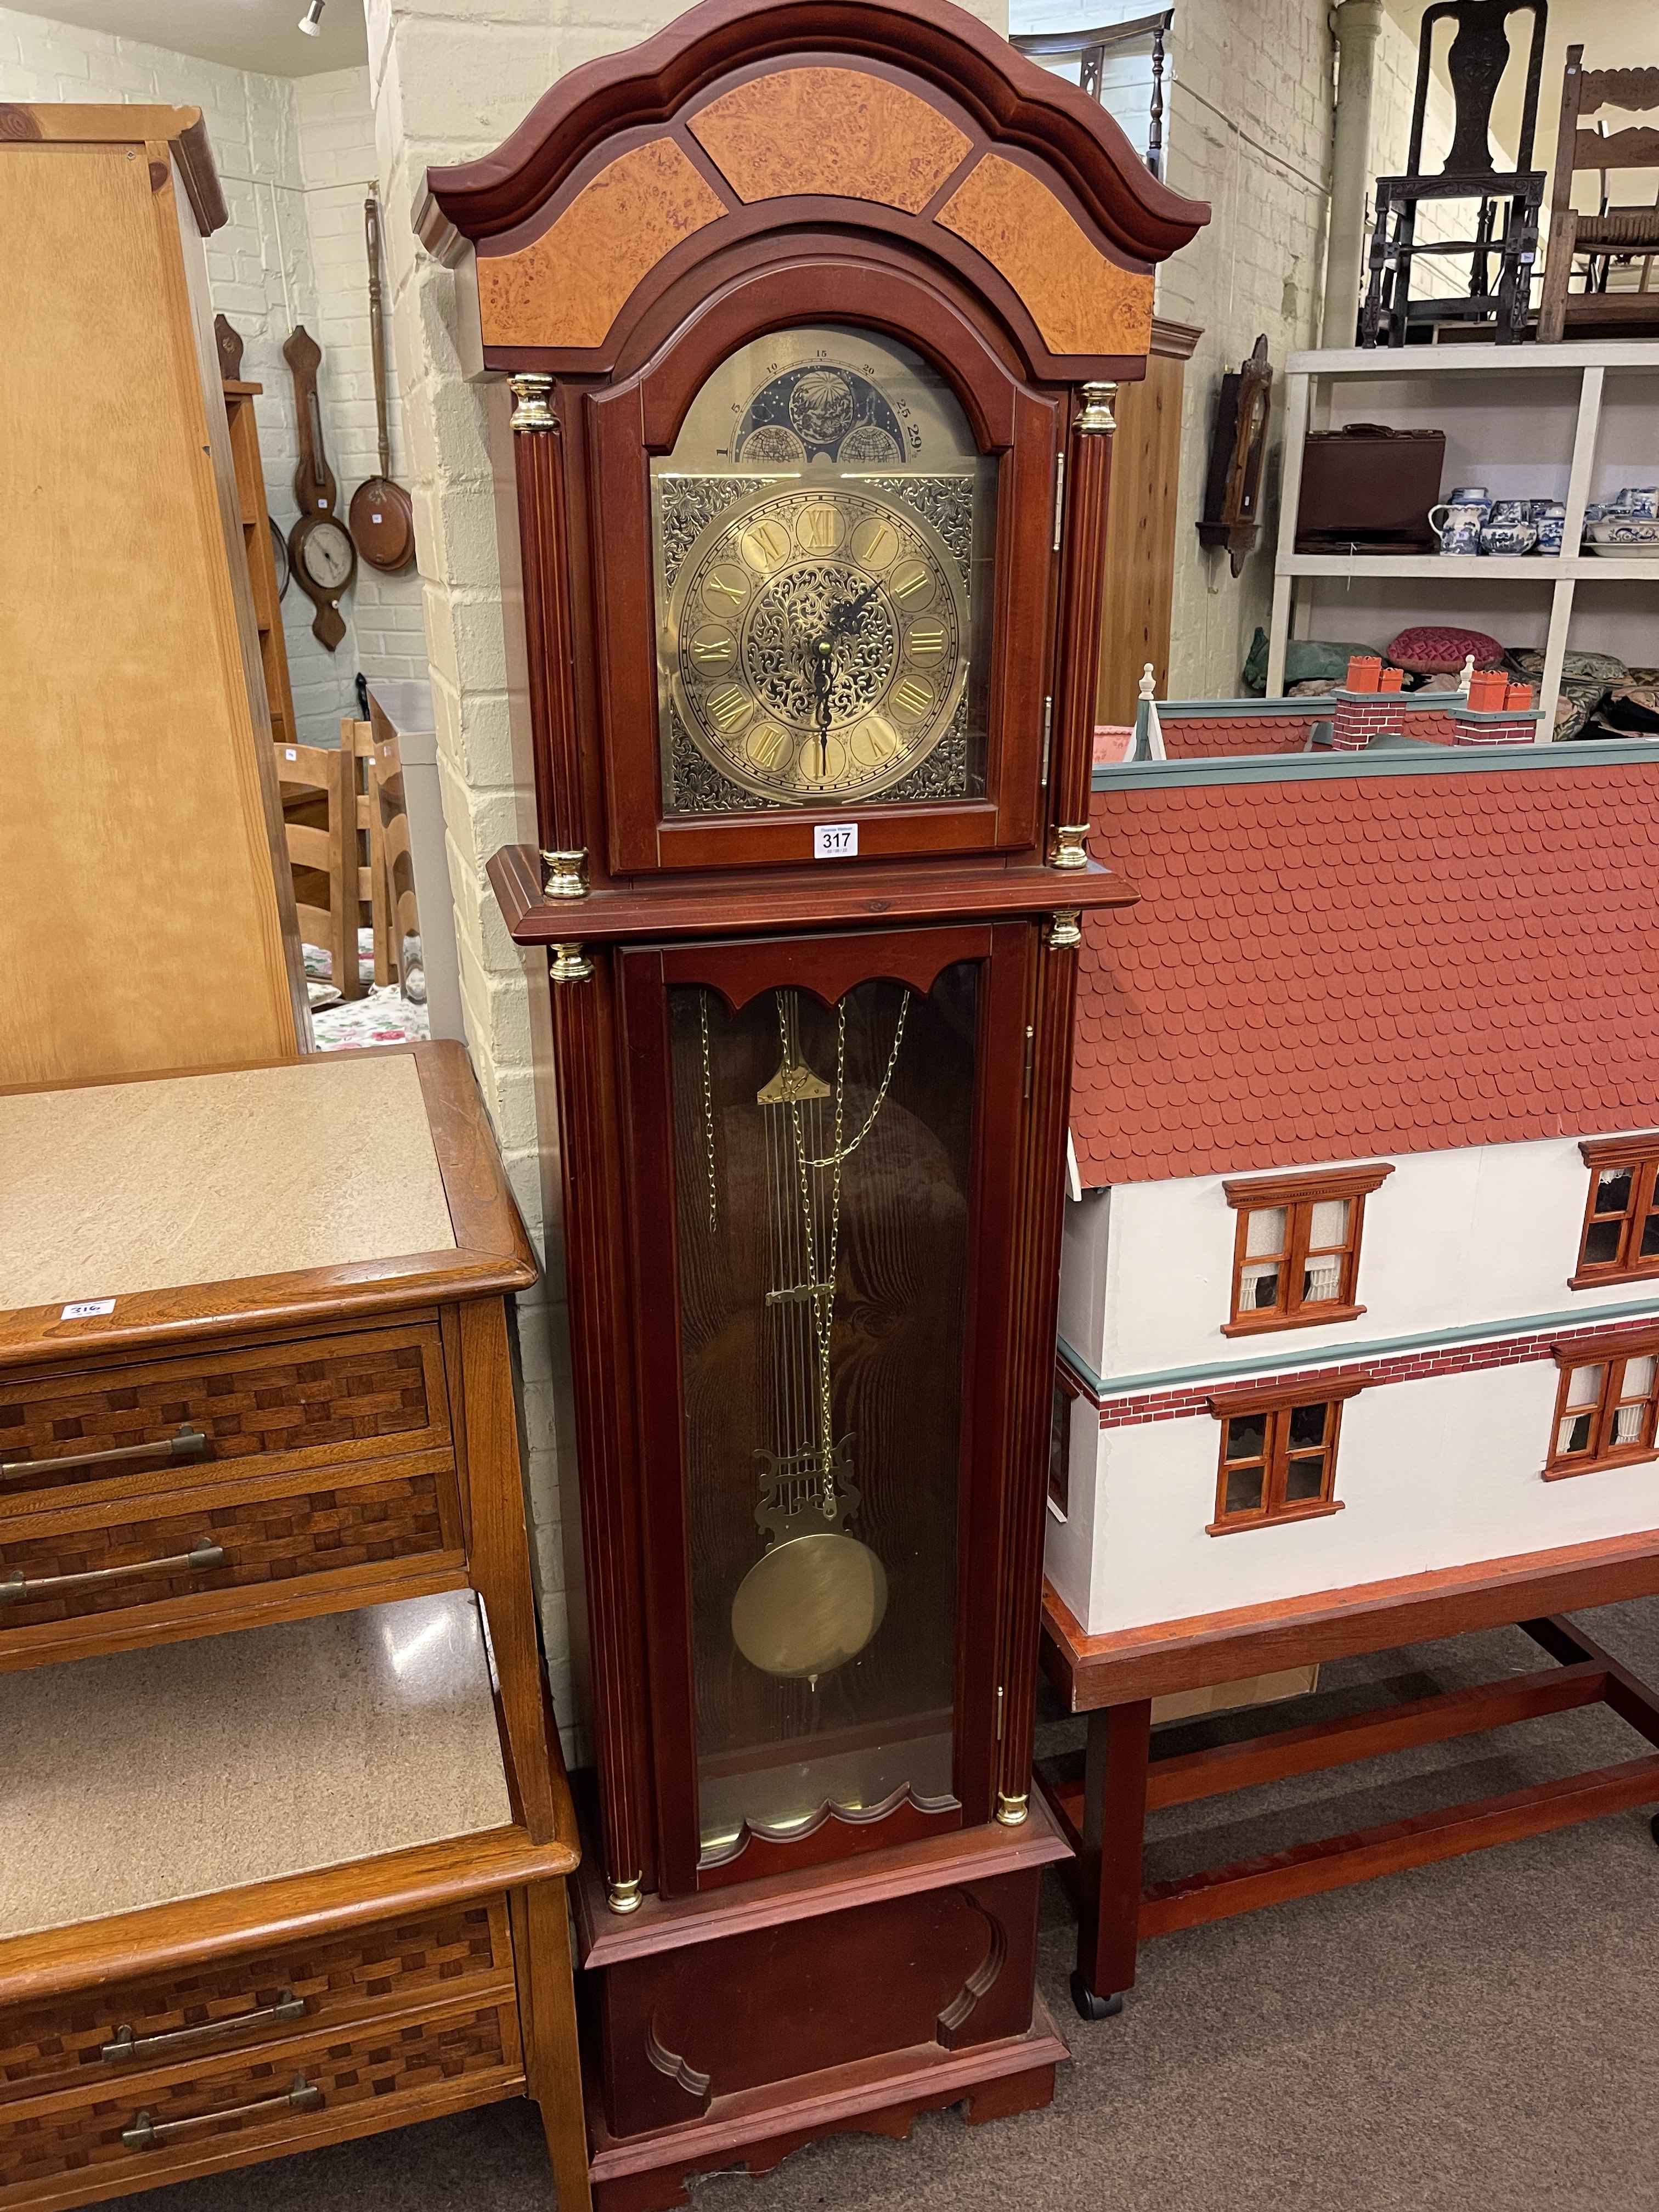 Modern double weight longcase clock having arched dial.